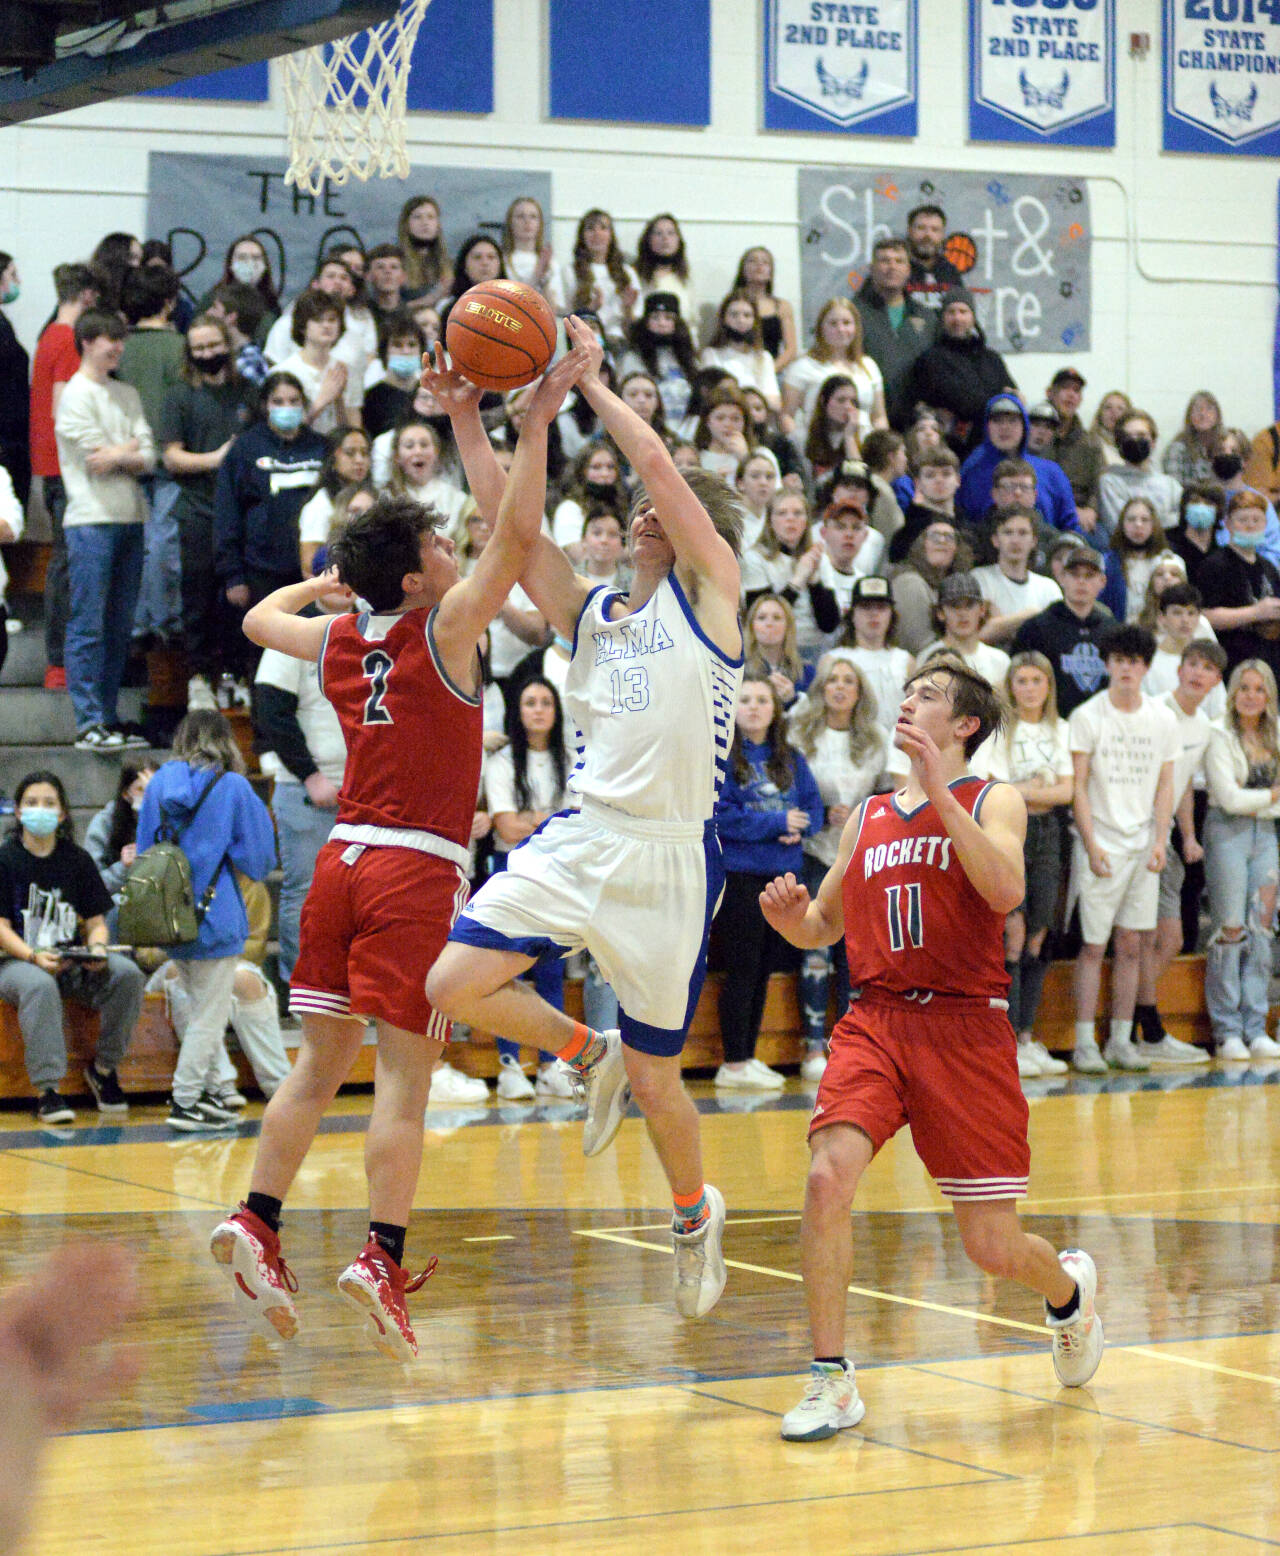 RYAN SPARKS | THE DAILY WORLD Elma’s Traden Carter (13) drives to the basket against Castle Rock’s Trevor Rogen (2) and Lane Partridge during the Eagles’ 57-47 loss in the 1A District 4 Tournament on Thursday in Elma.